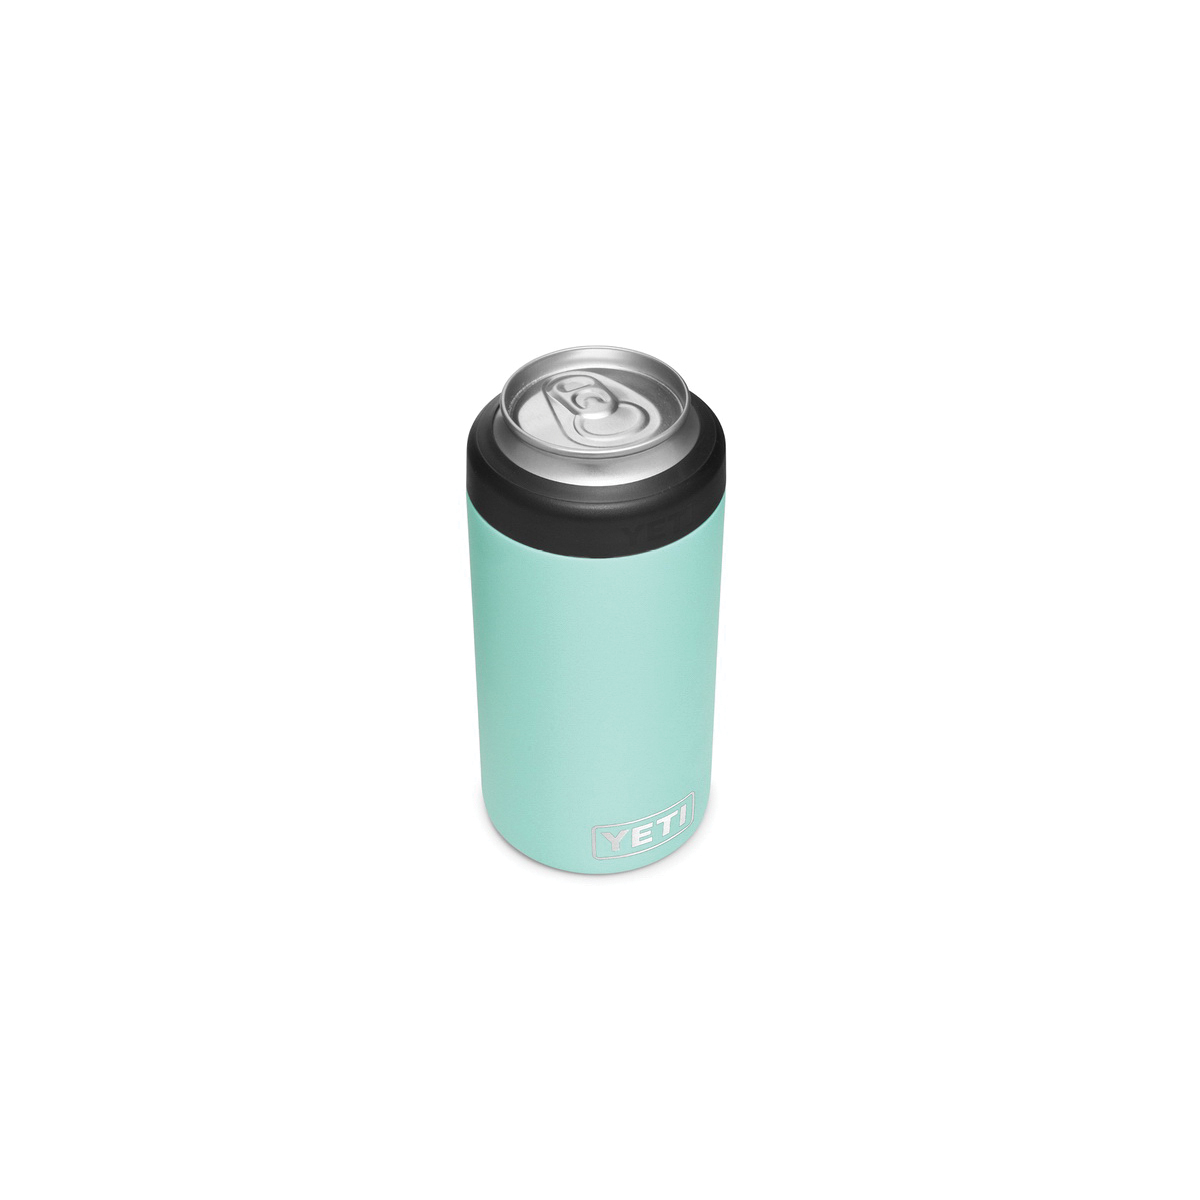 YETI Rambler 21070090050 Colster Can Insulator, 3 in Dia x 6 in H, 16 oz Can/Bottle, Stainless Steel, Seafoam - 3